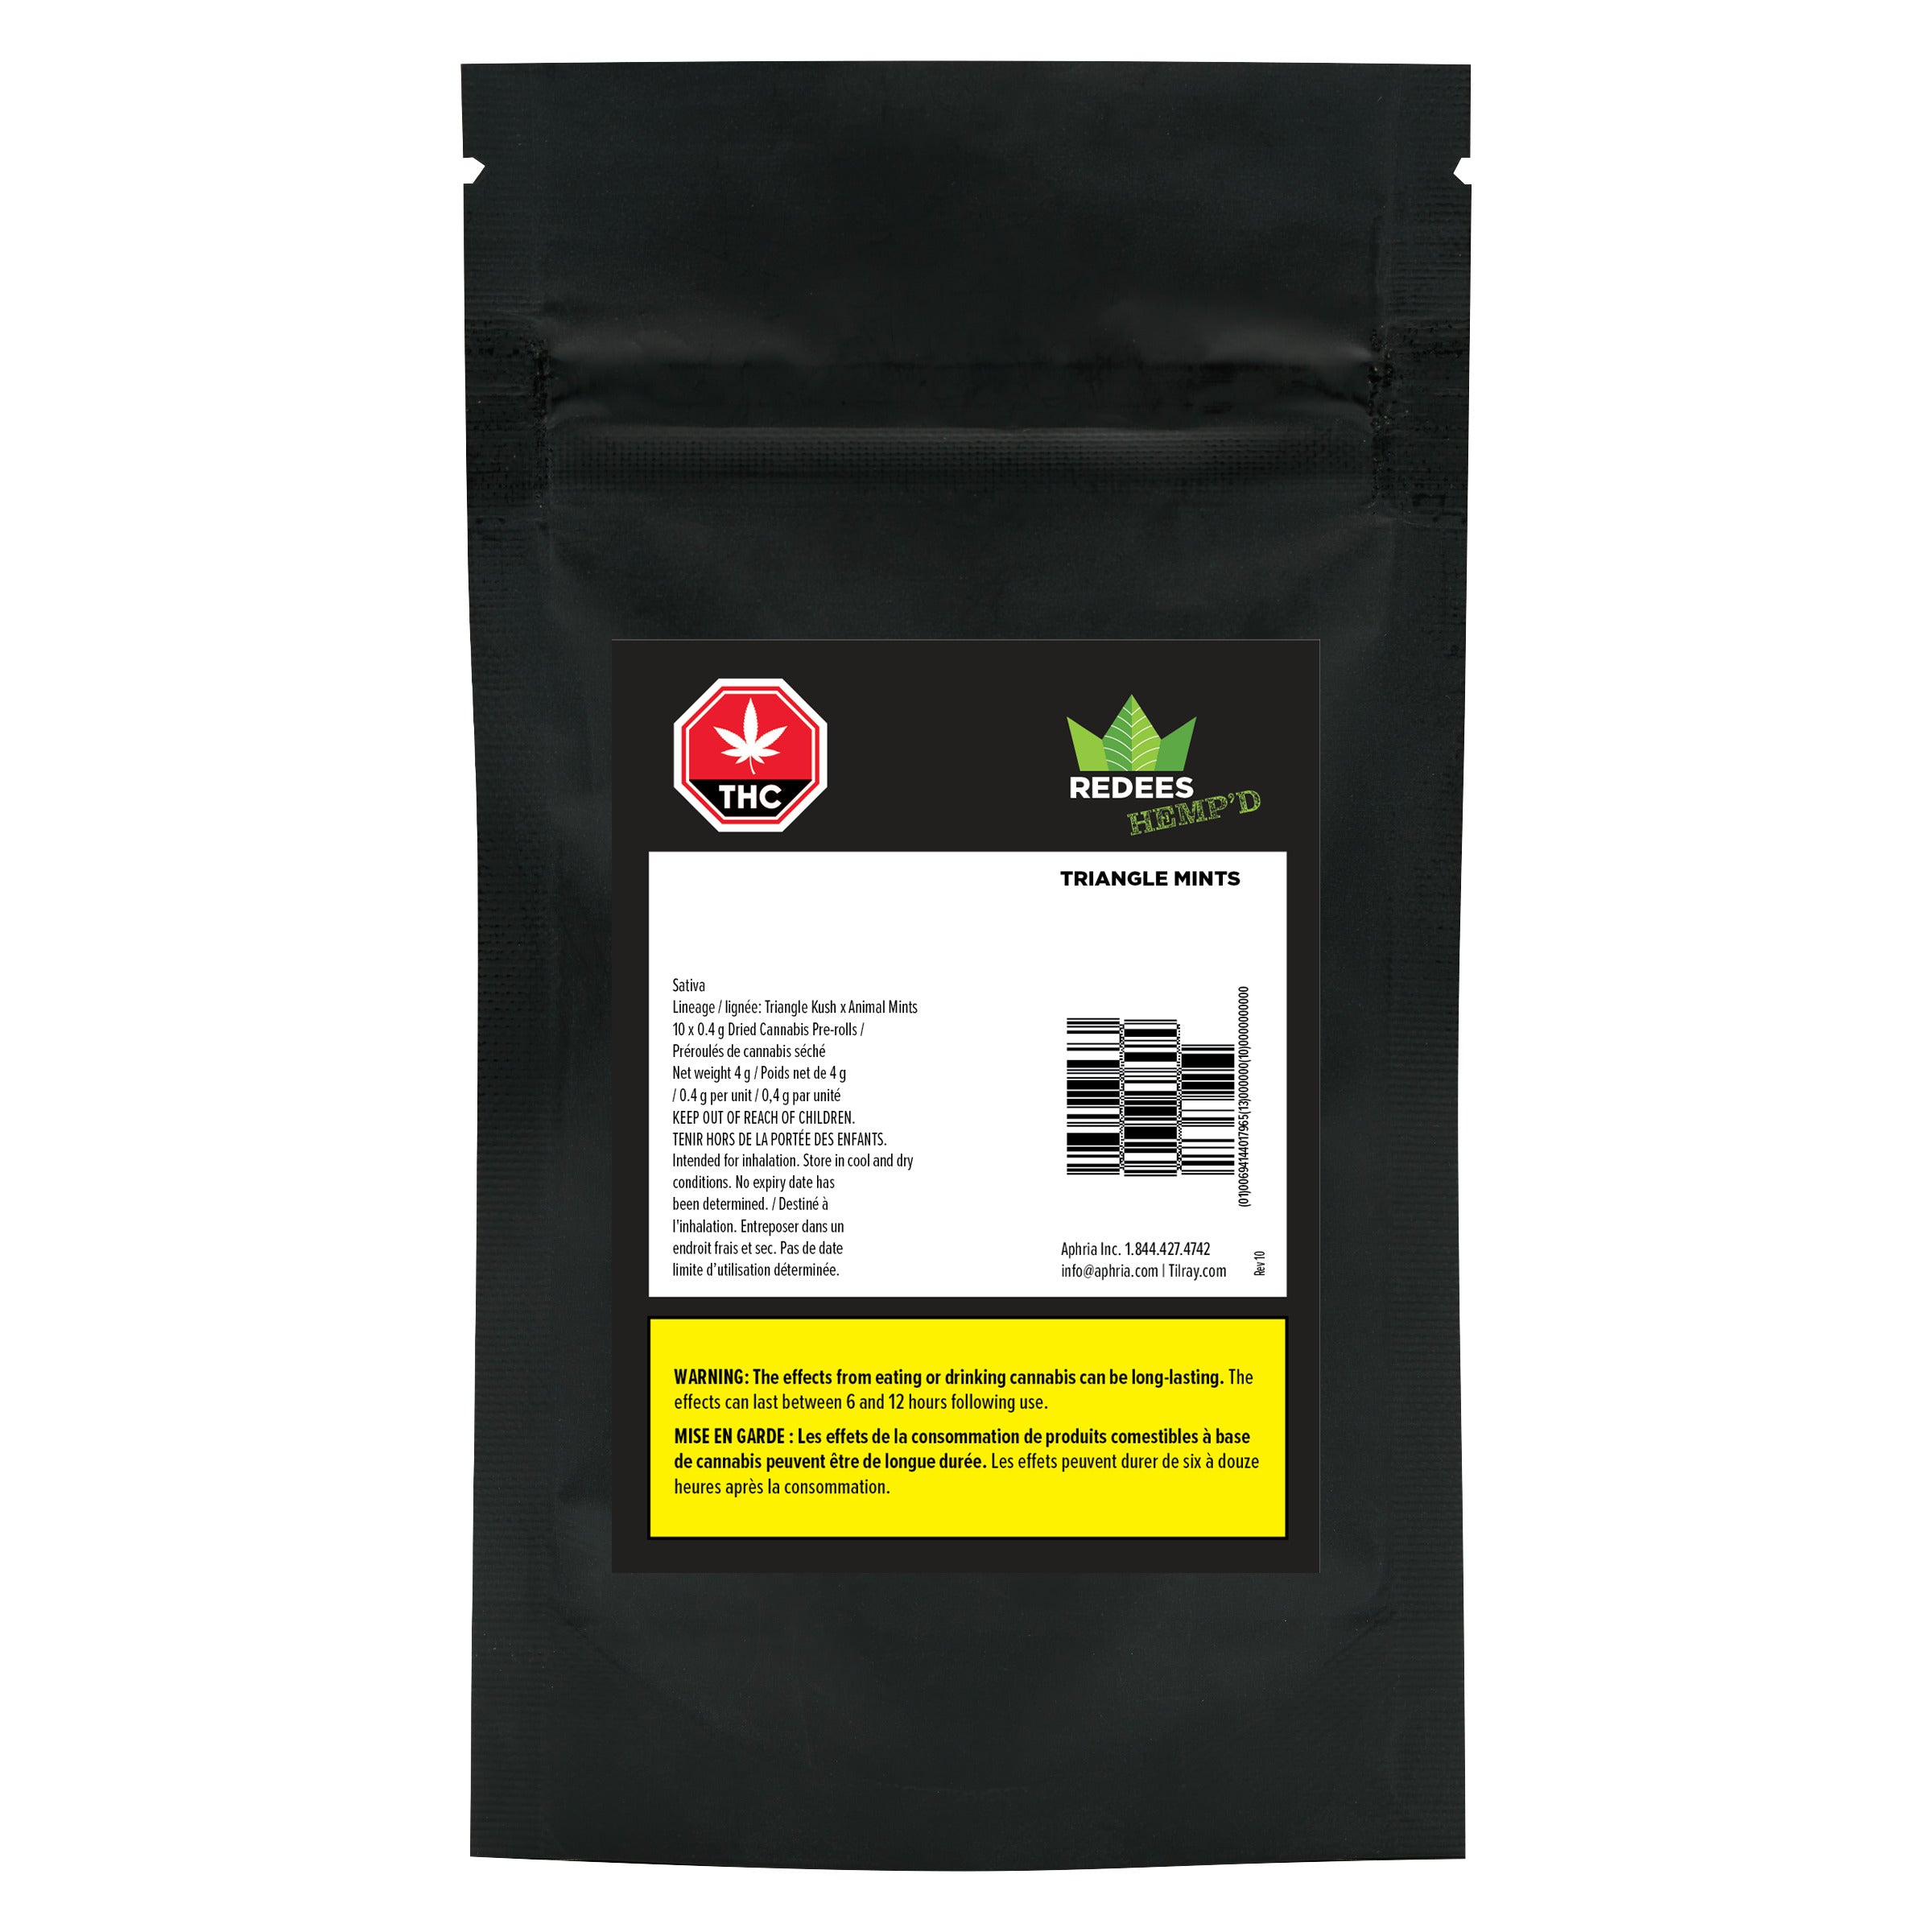 REDECAN REDEES HEMPD TRIANGLE MINTS (IND) PRE-ROLL - 0.4GX10